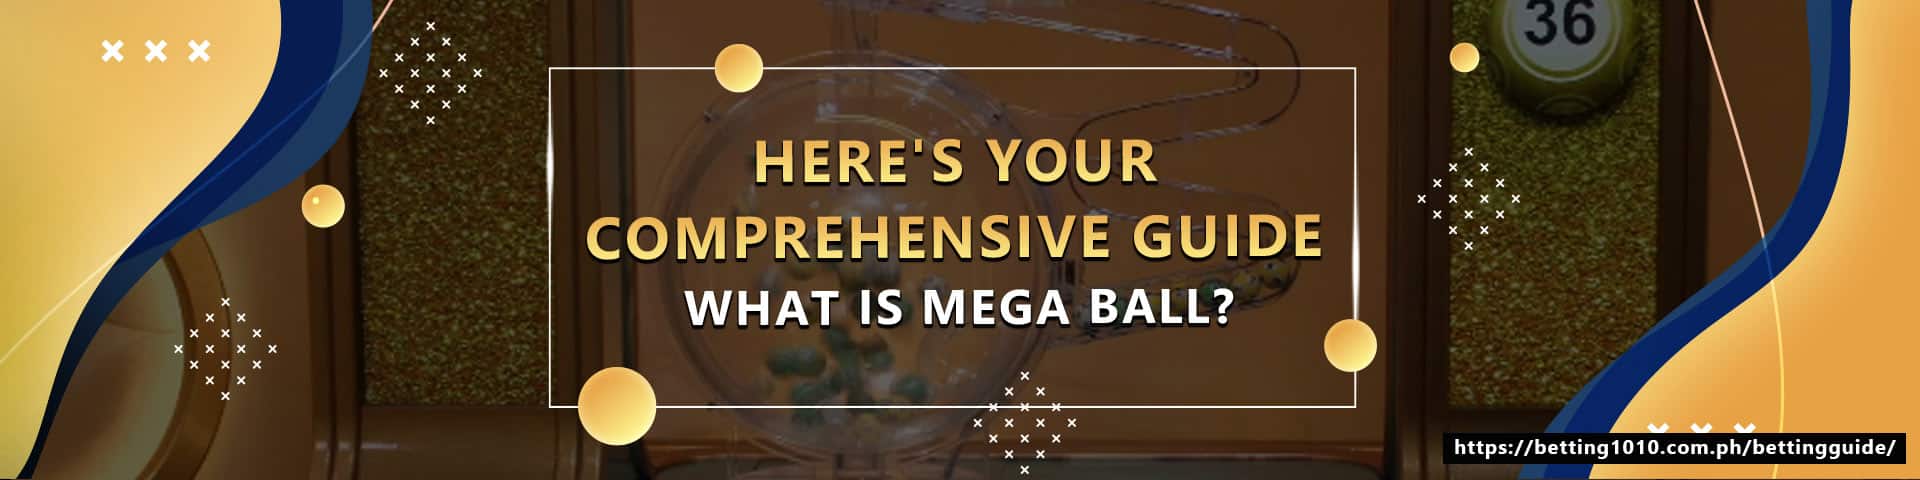 Here's your comprehensive guide. What is Mega Ball